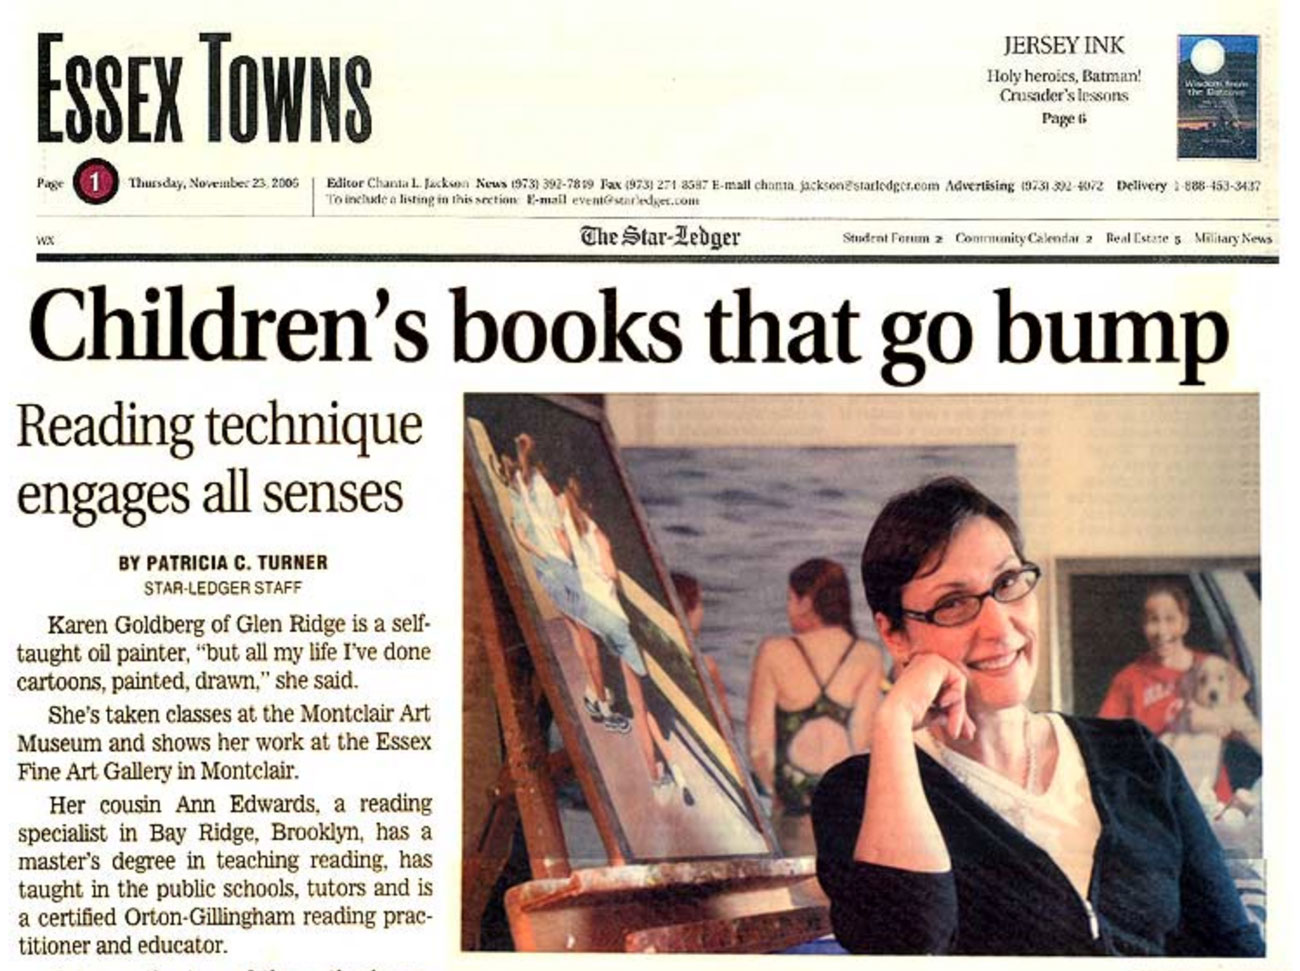 Bumpy Books in the Star Ledger